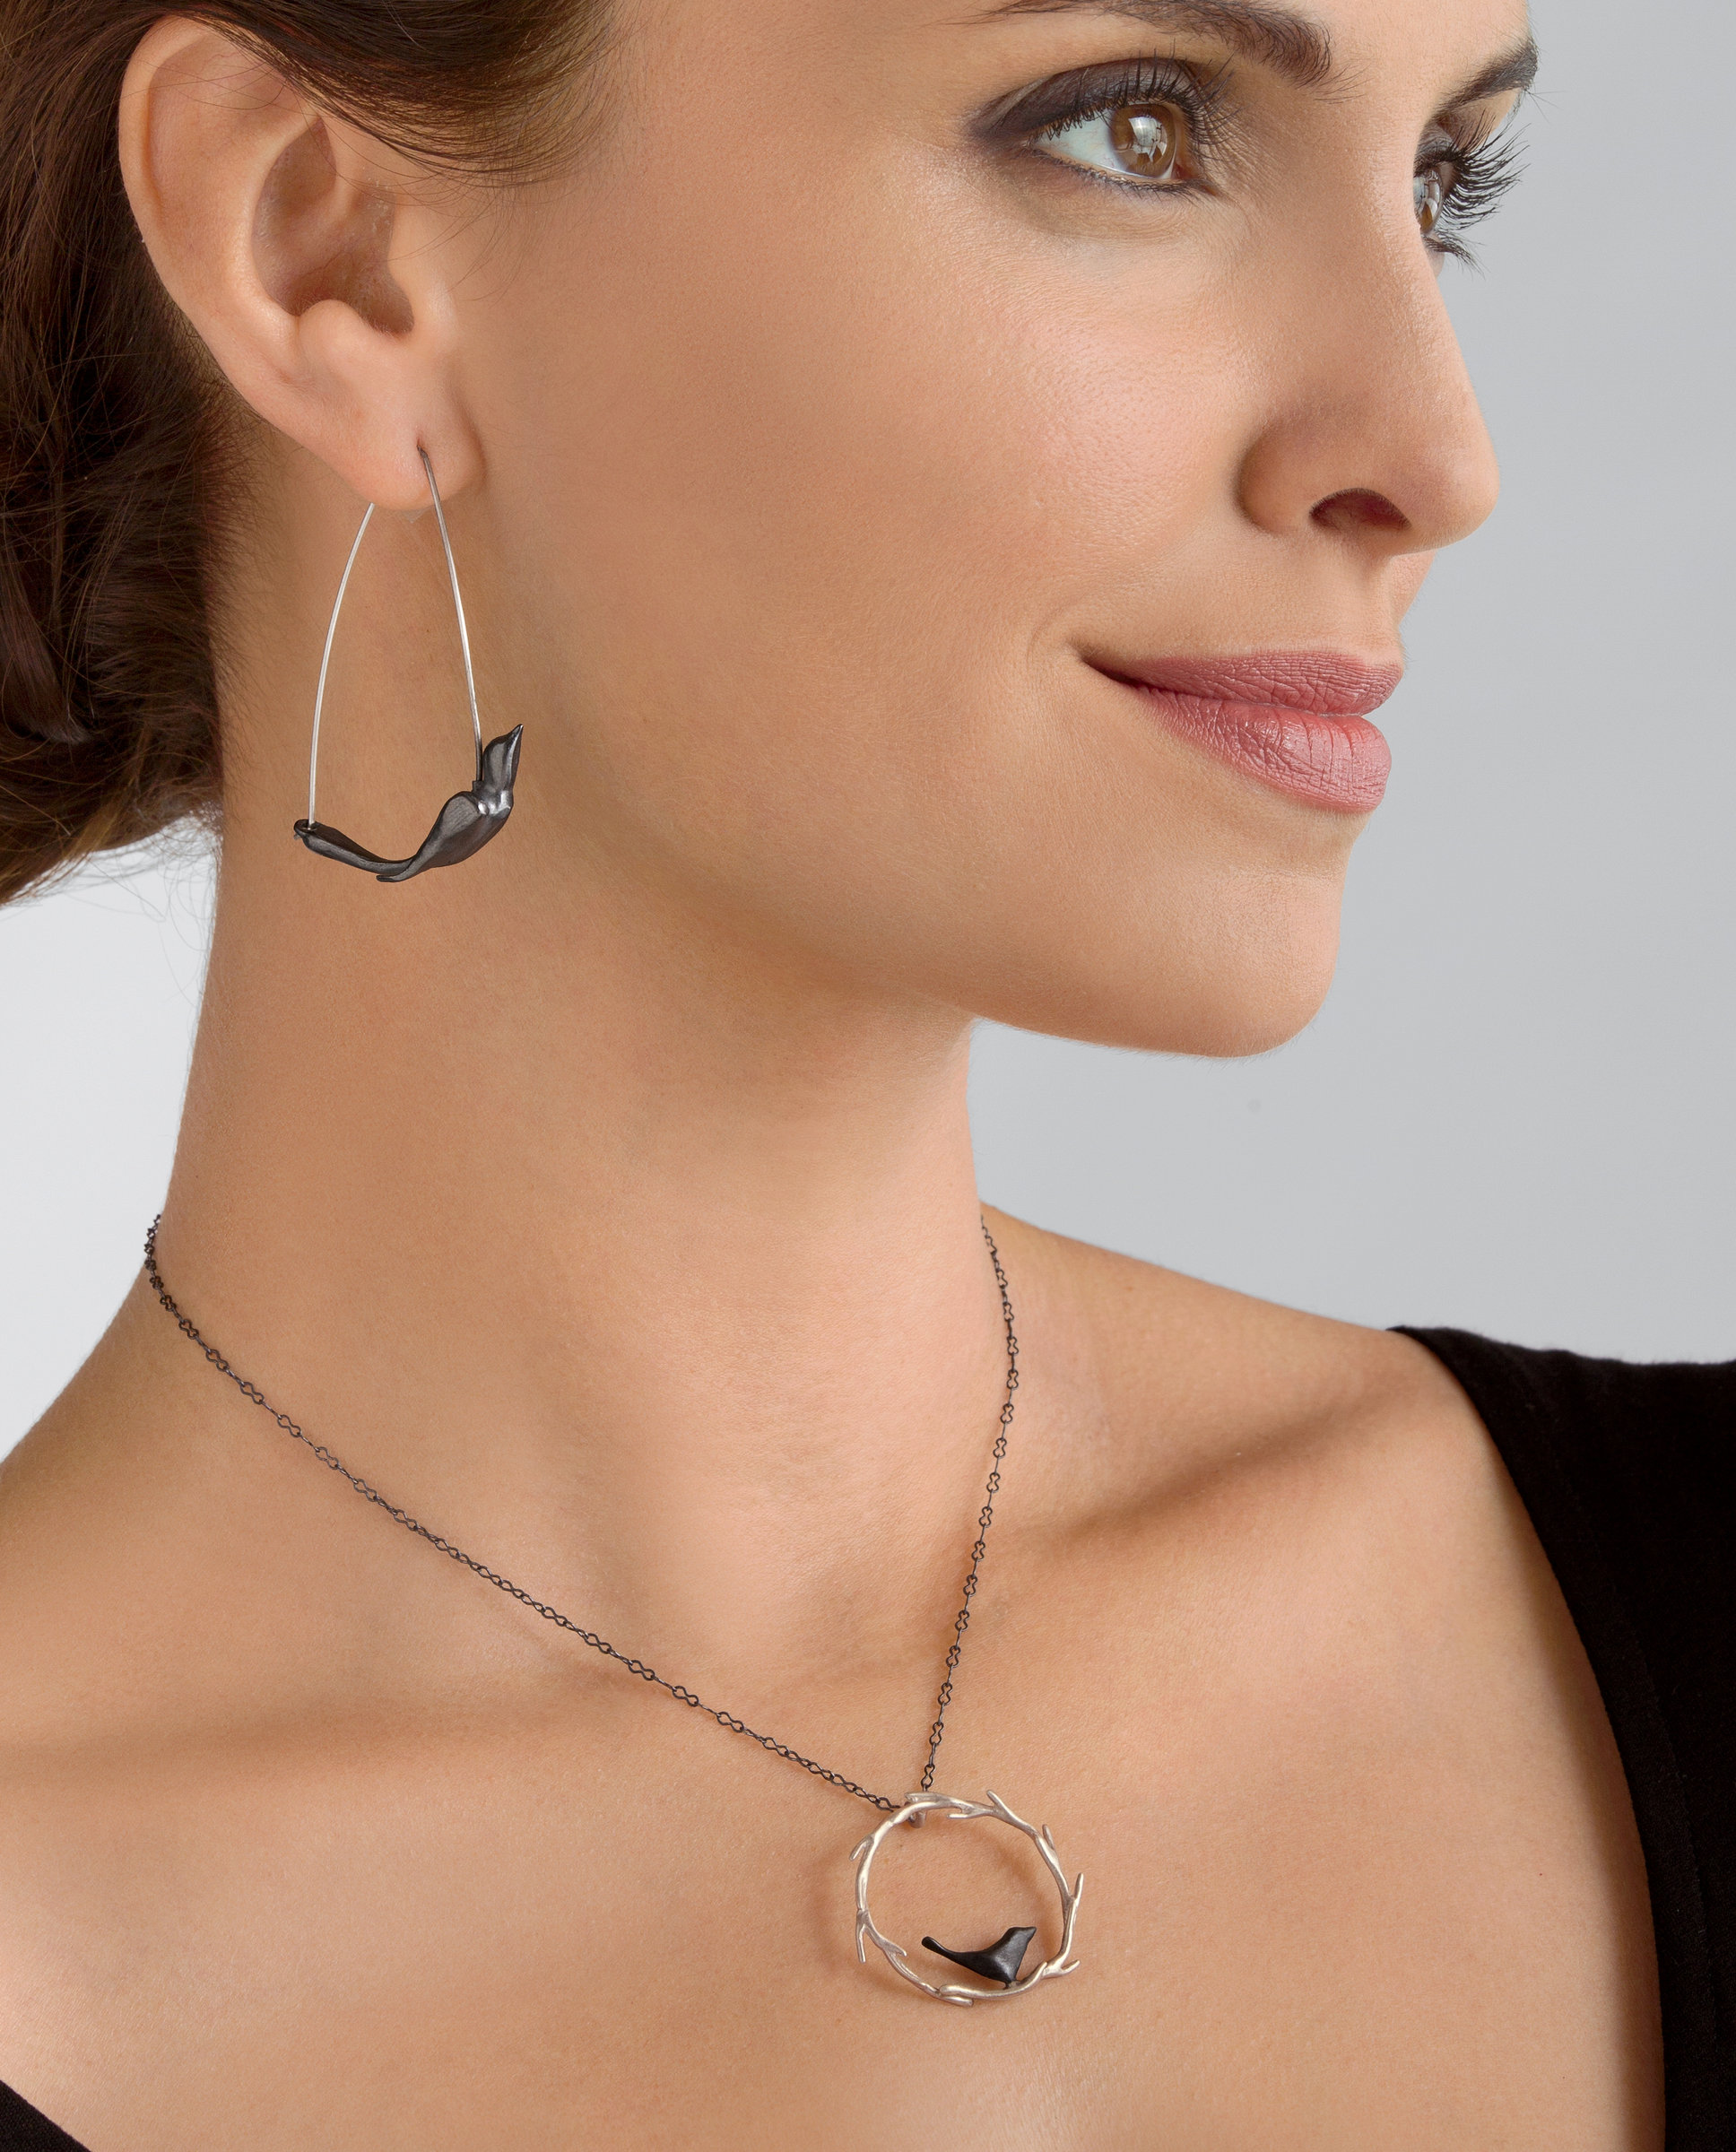 Black Bird Collection by Lisa Cimino (Earrings and Necklace) | Artful Home - earrings_necklace_l